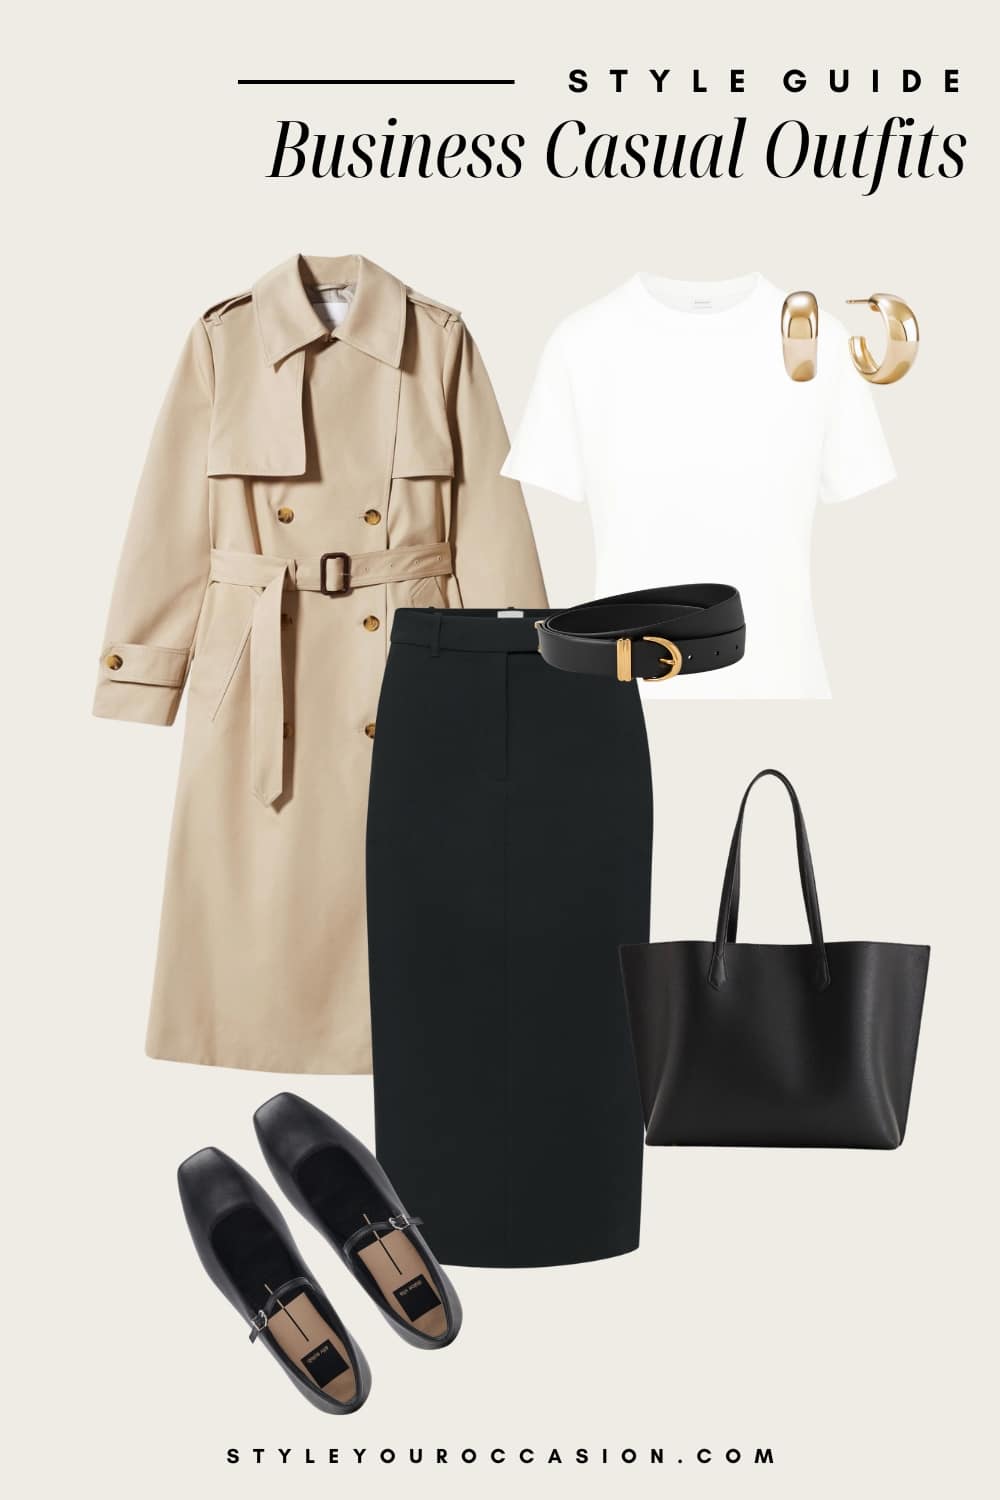 an image board of a business casual outfit featuring a black midi pencil skirt, a white tee, a classic trench coat, black Mary Jane flats, and black and gold accessories